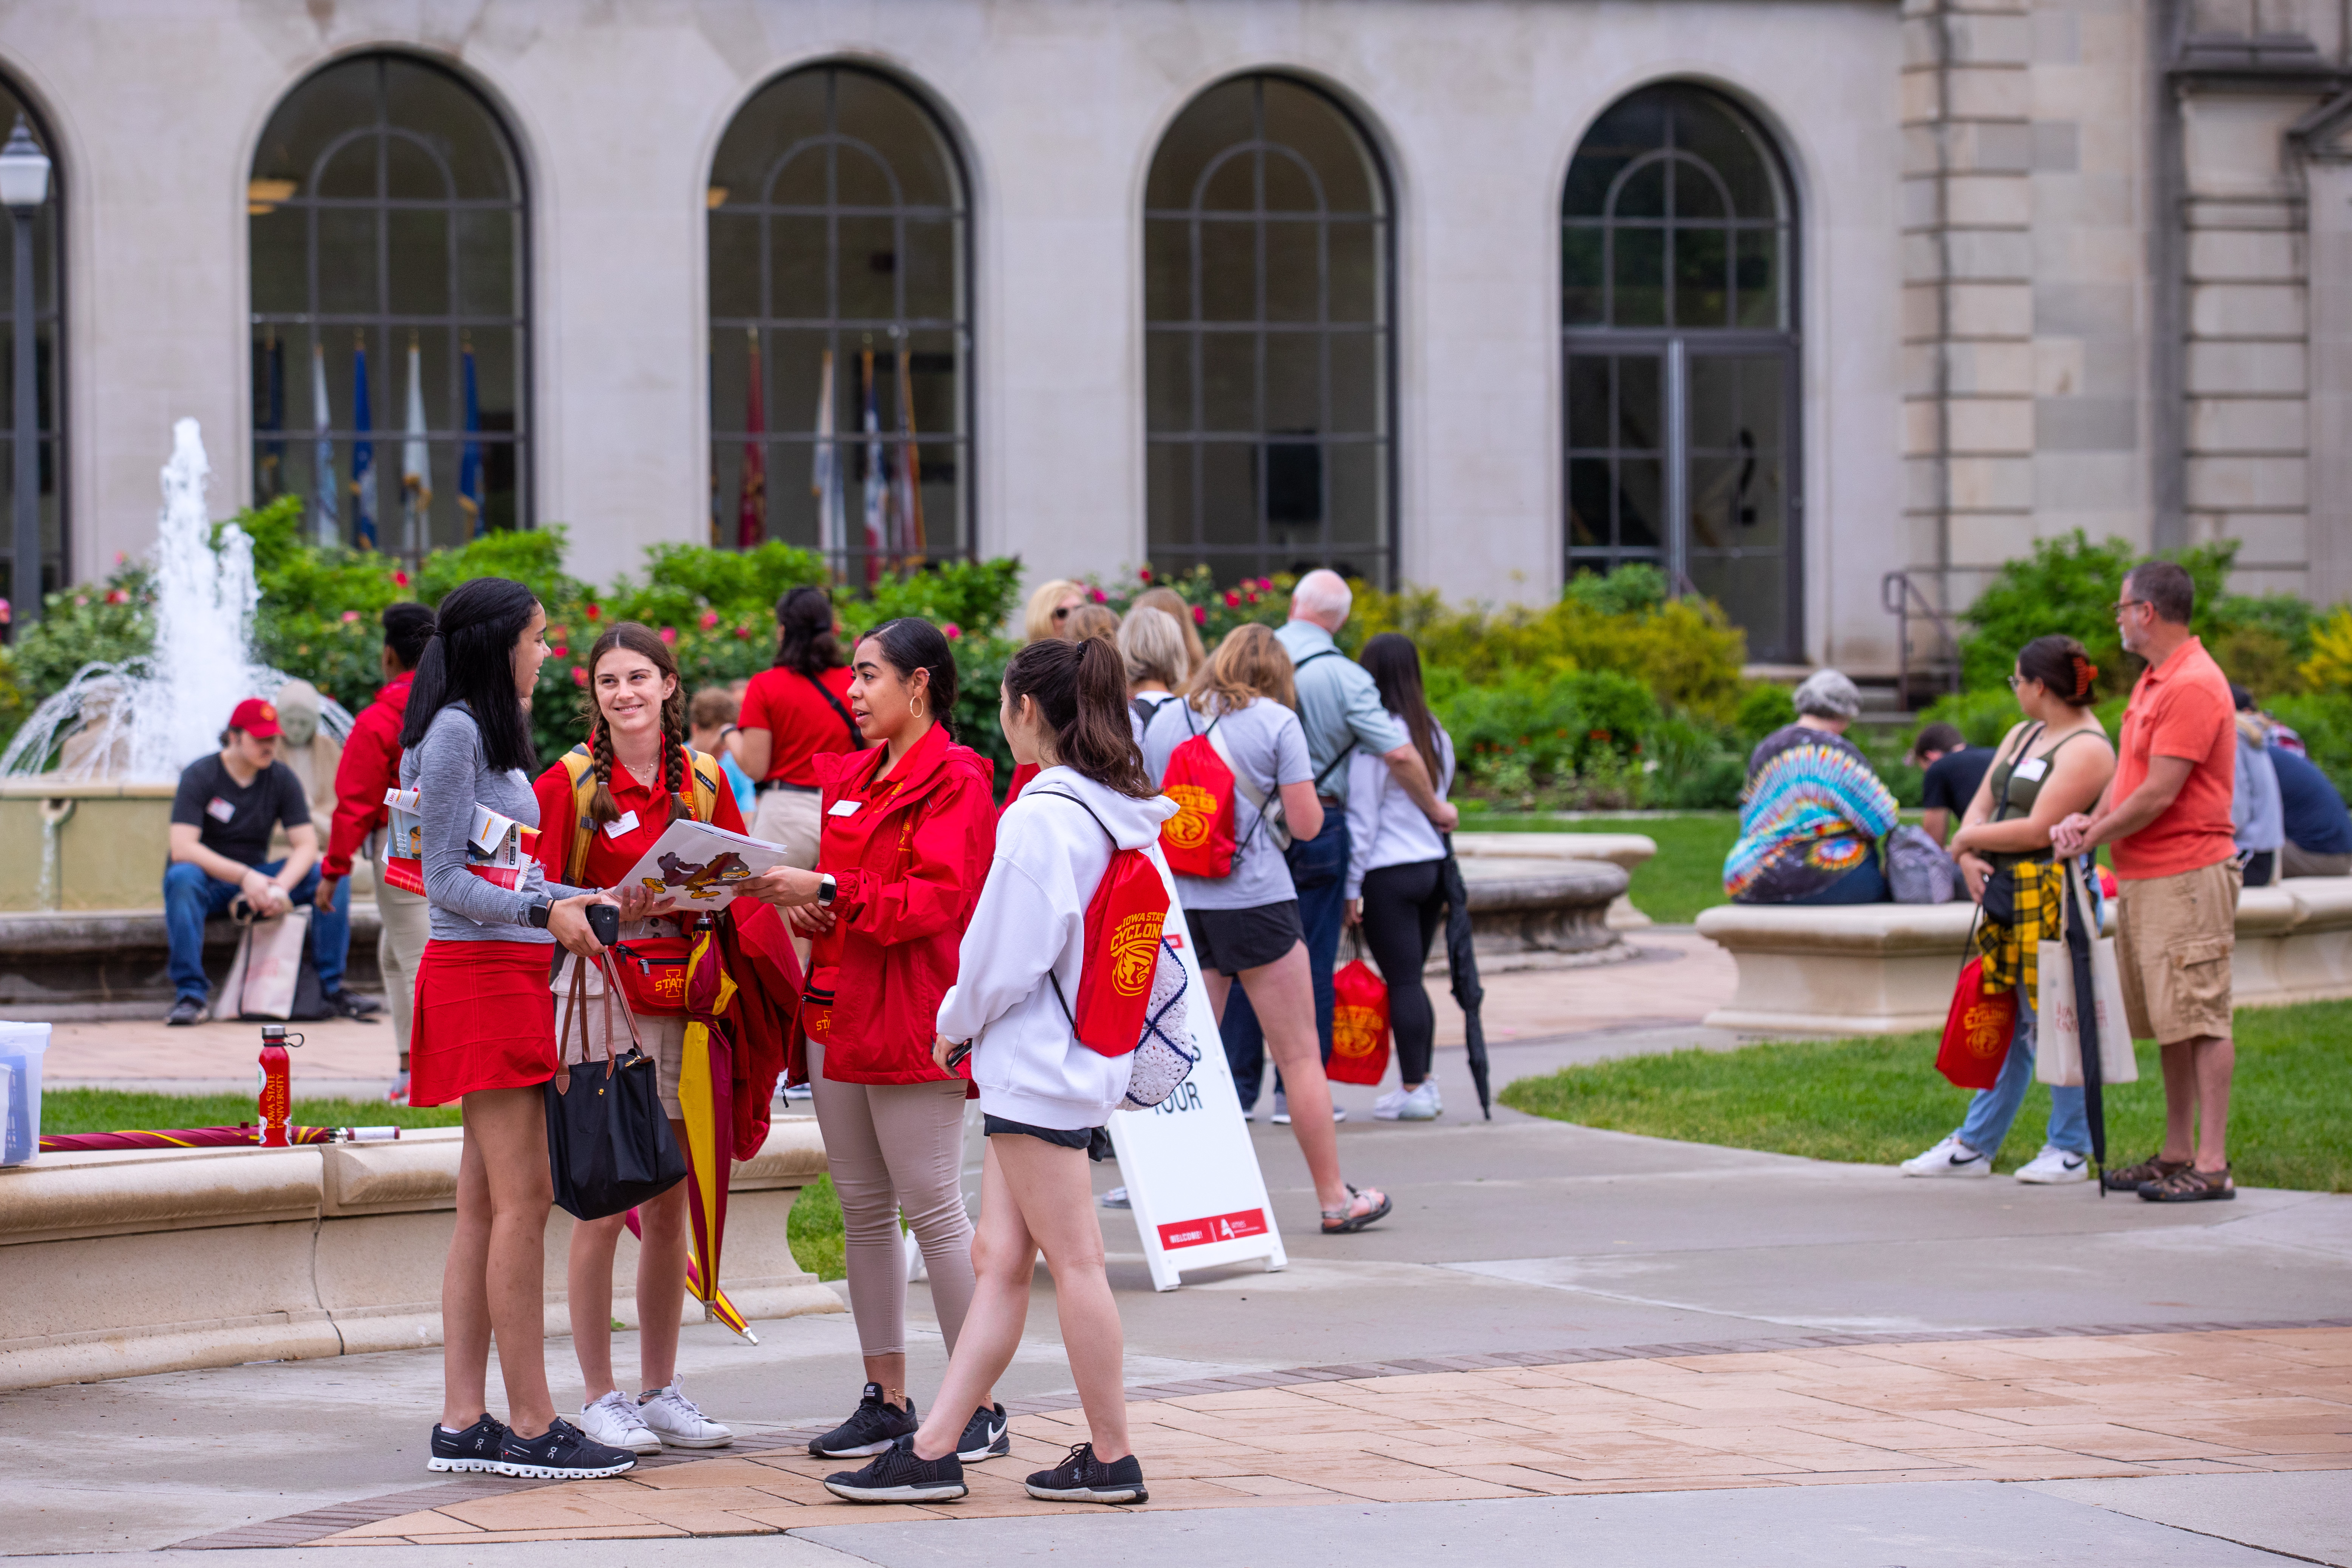 Two Cyclone Aides help students outside the Memorial Union.